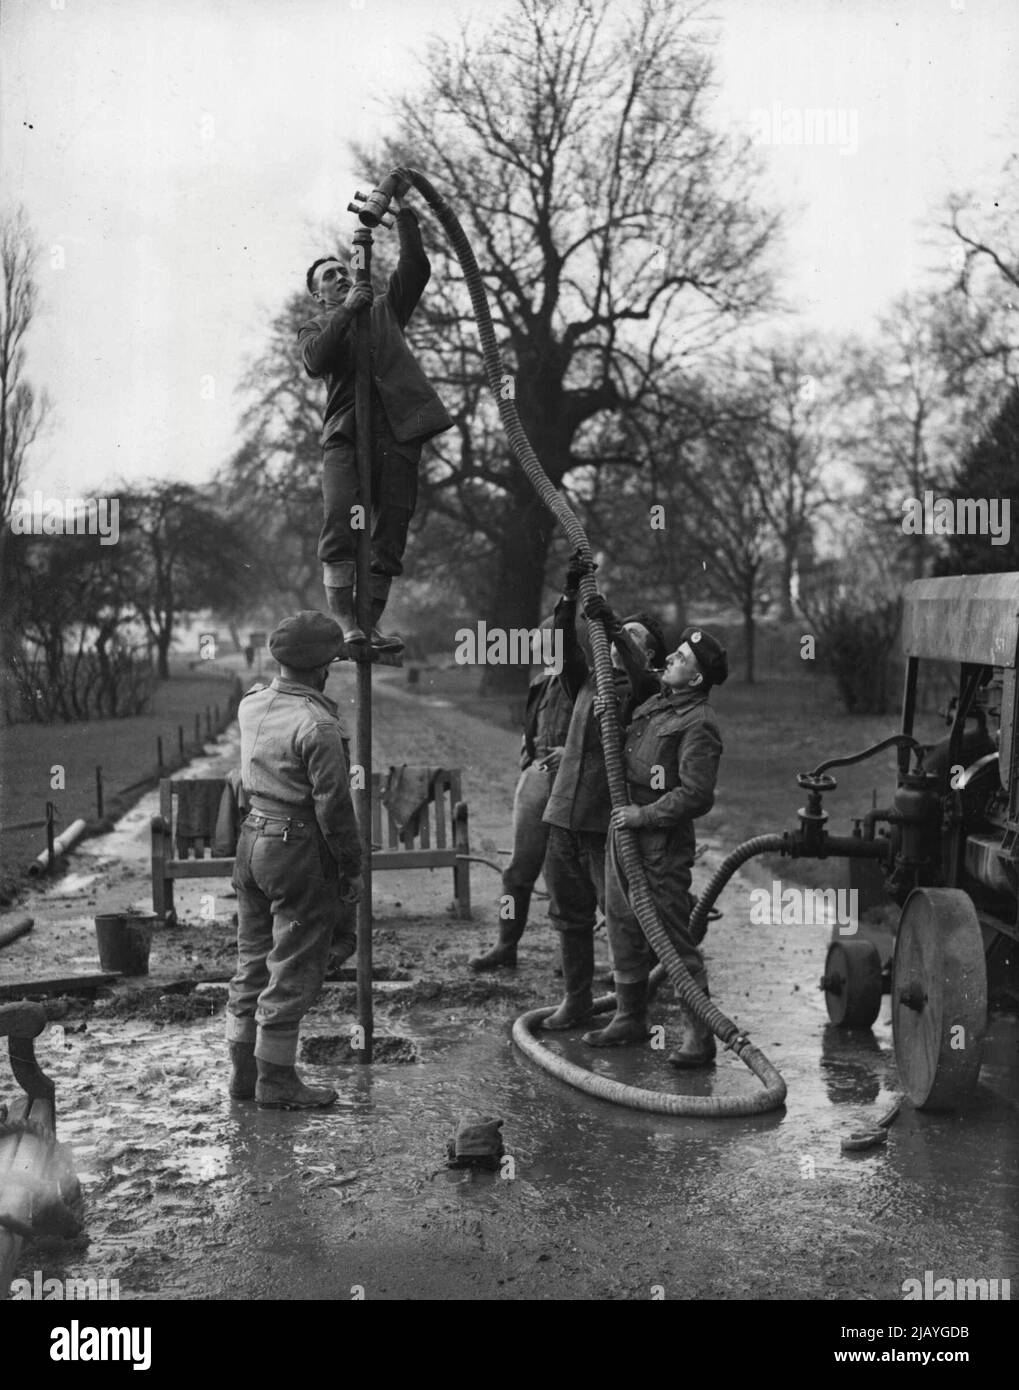 The Palace Bomb - Sappers commencing drilling operations to-day, Friday, on the suspected position of the nearest bomb to Buckingham Palace - some two hundred yards from the Palace gates. The mystery of the unknown St. Jame's Park 'Palace' bomb may soon be solved. Sappers are uncovering the 'solid object' located three days ago. February 01, 1946. (Photo by Reuterphoto). Stock Photo